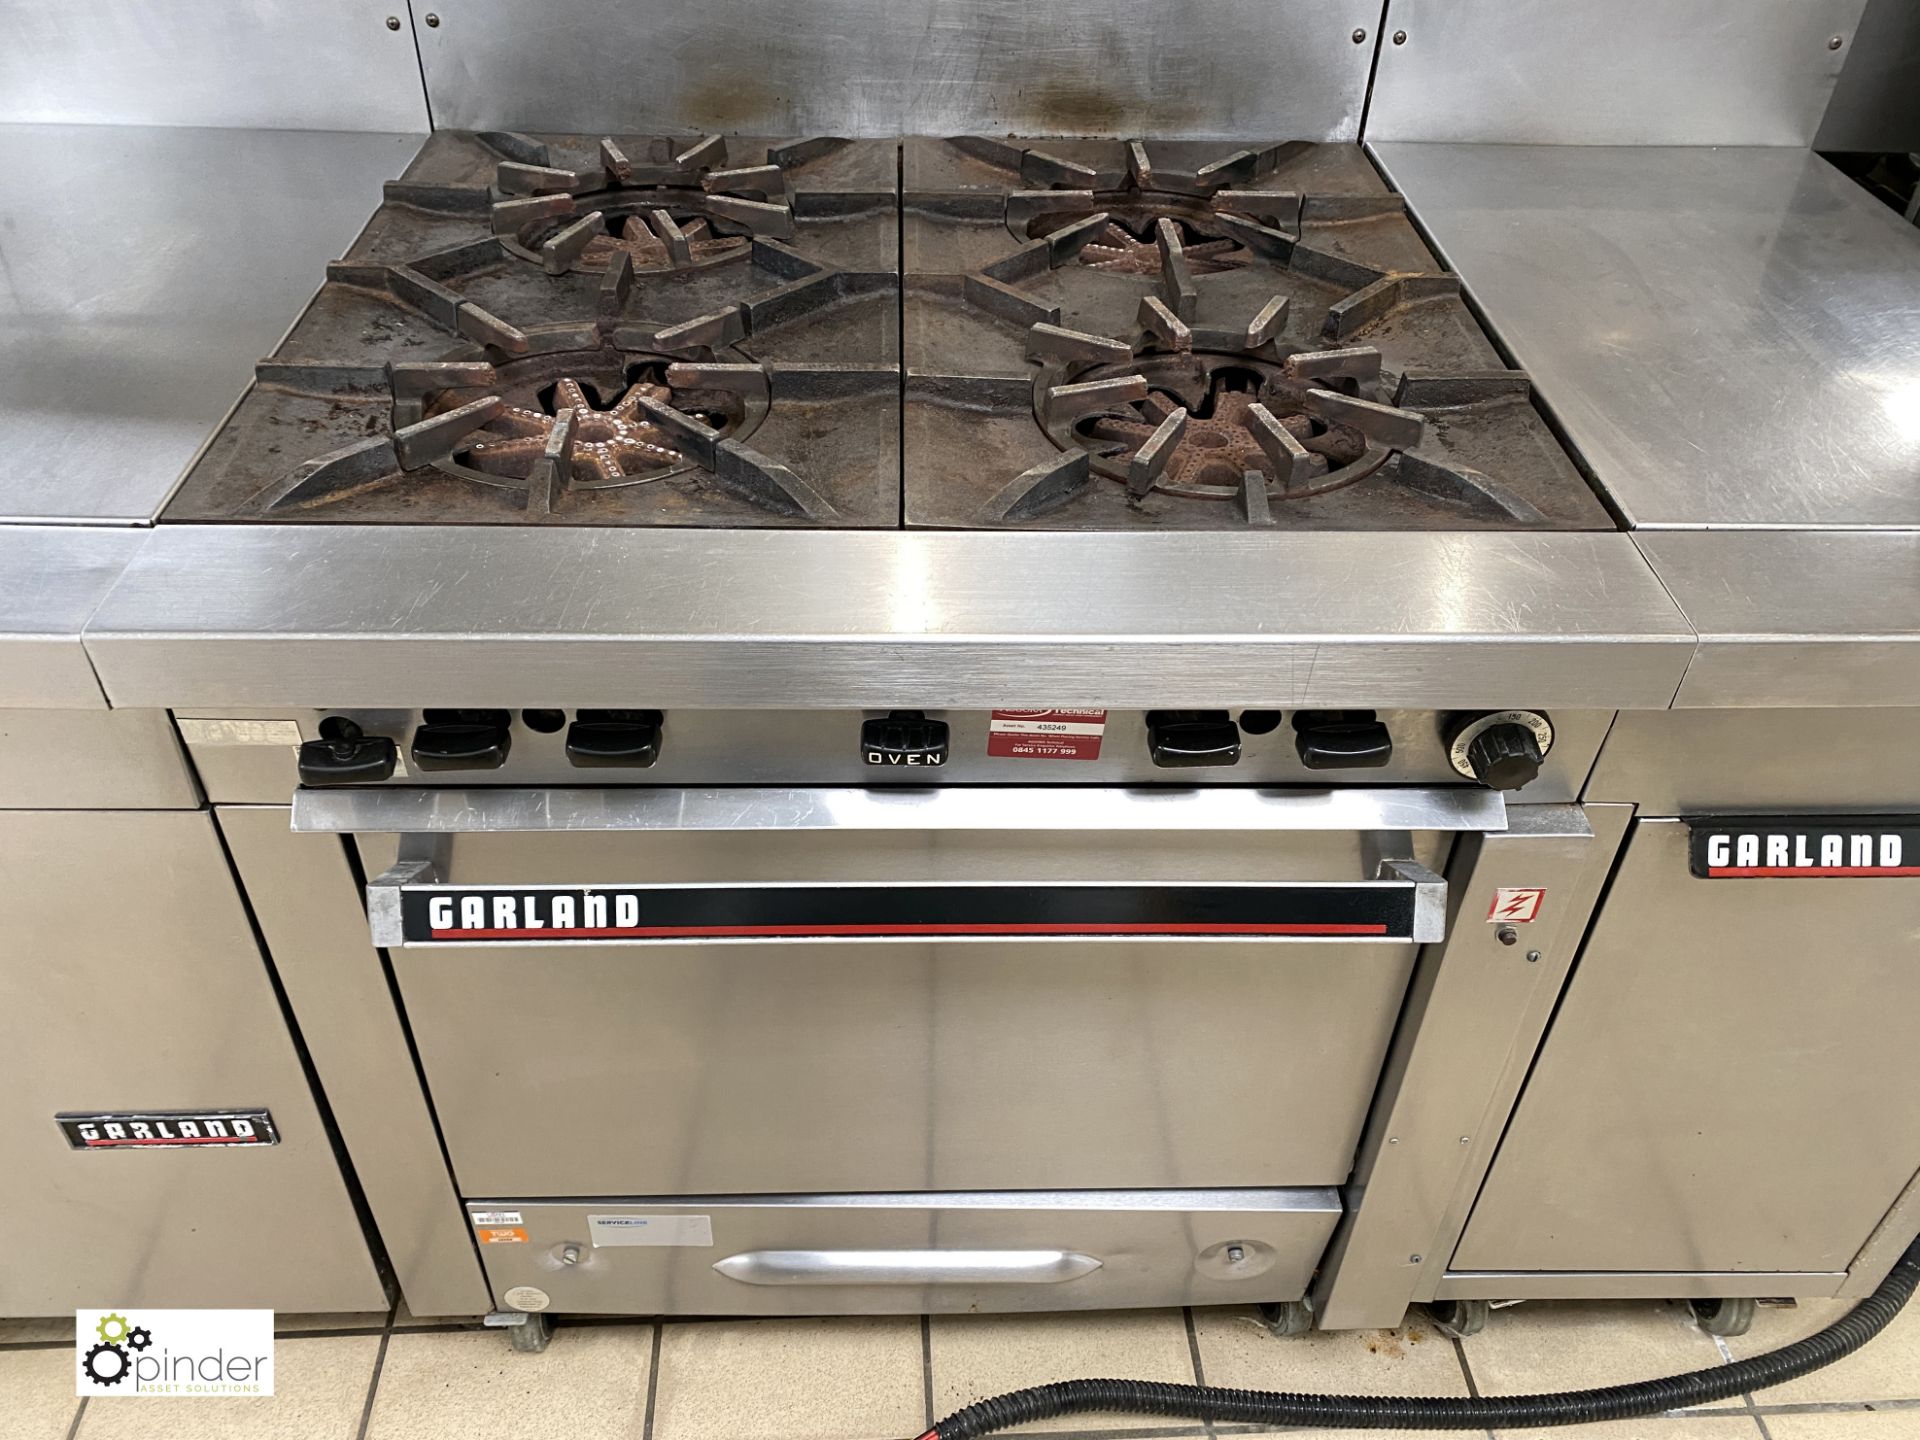 Garland gas fired stainless steel Cooking Range comprising Garland contact bullseye top oven, - Image 5 of 6